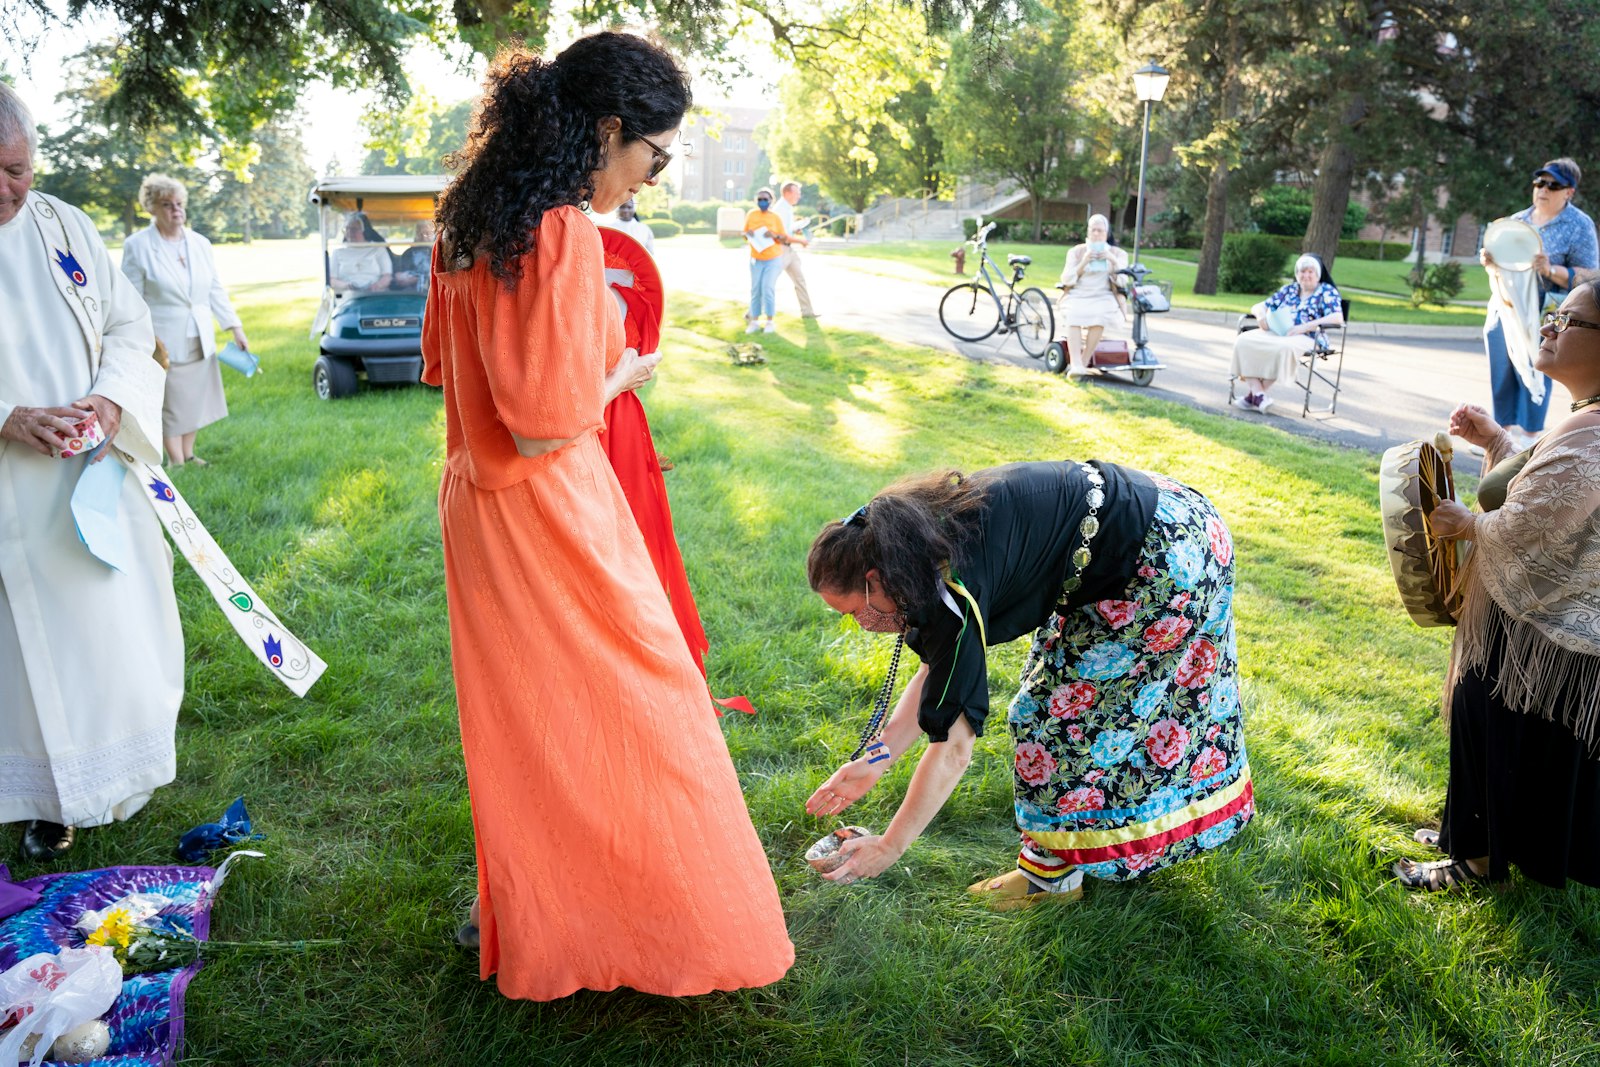 Gros-Louis applies smudge, a type of incense made from sage, to Anita Ruiz during the start of the solstice ceremony. Smudge is used in Native American prayer services much like incense is used during Mass, putting people in a prayerful mood through scent.